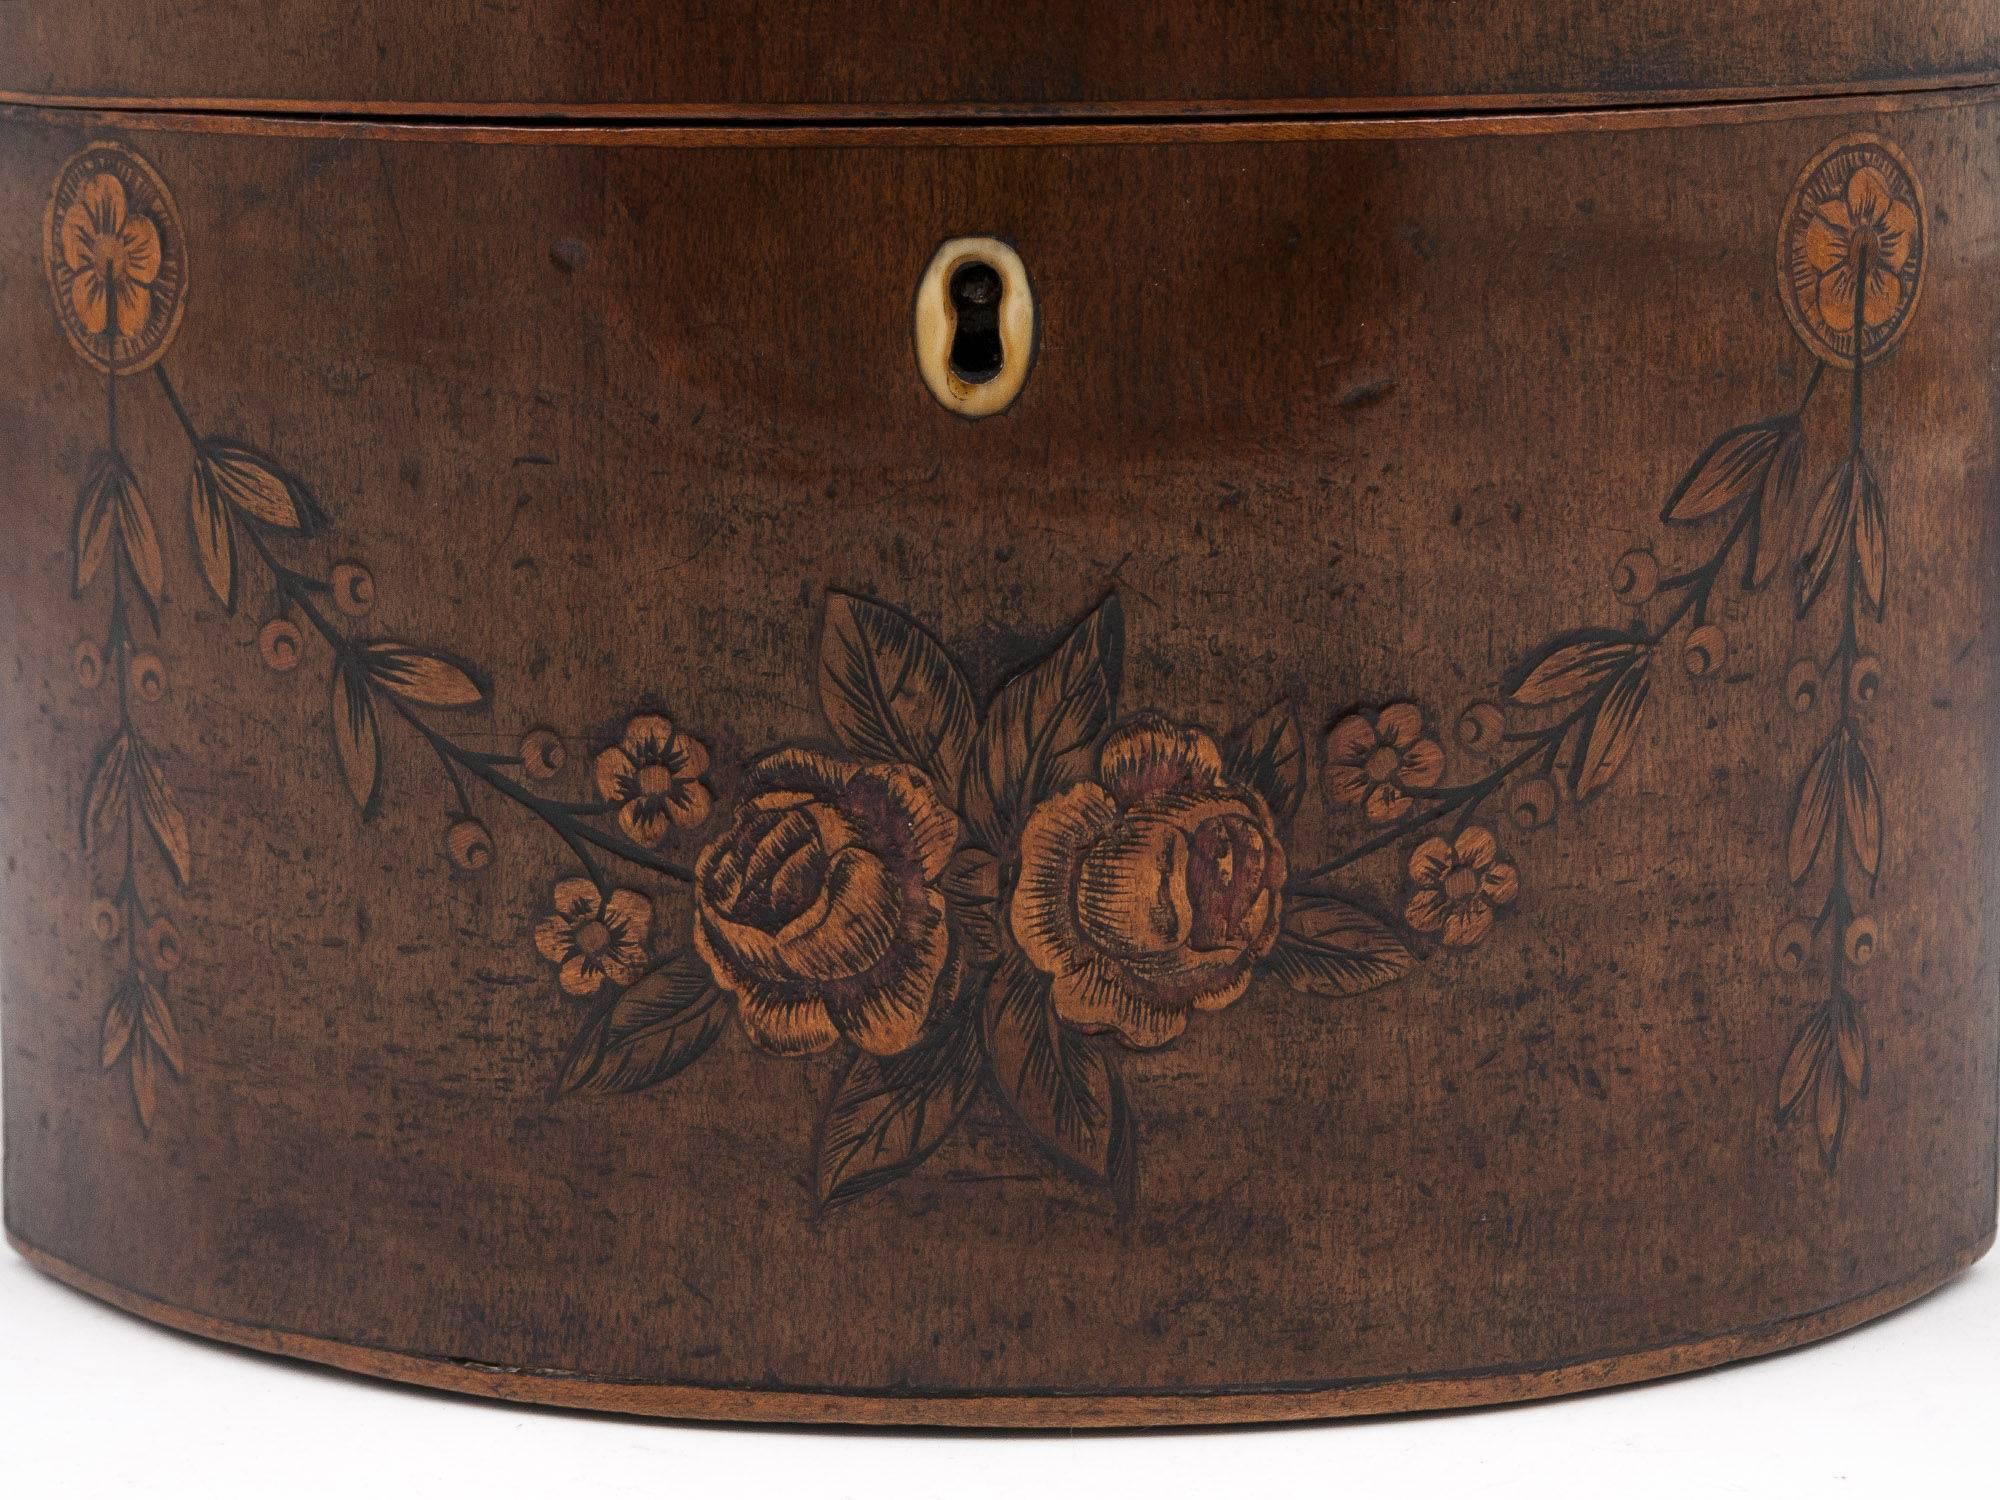 George III 18th Century Period Harewood Inlaid 'Navette' Shaped Tea Caddy For Sale 1